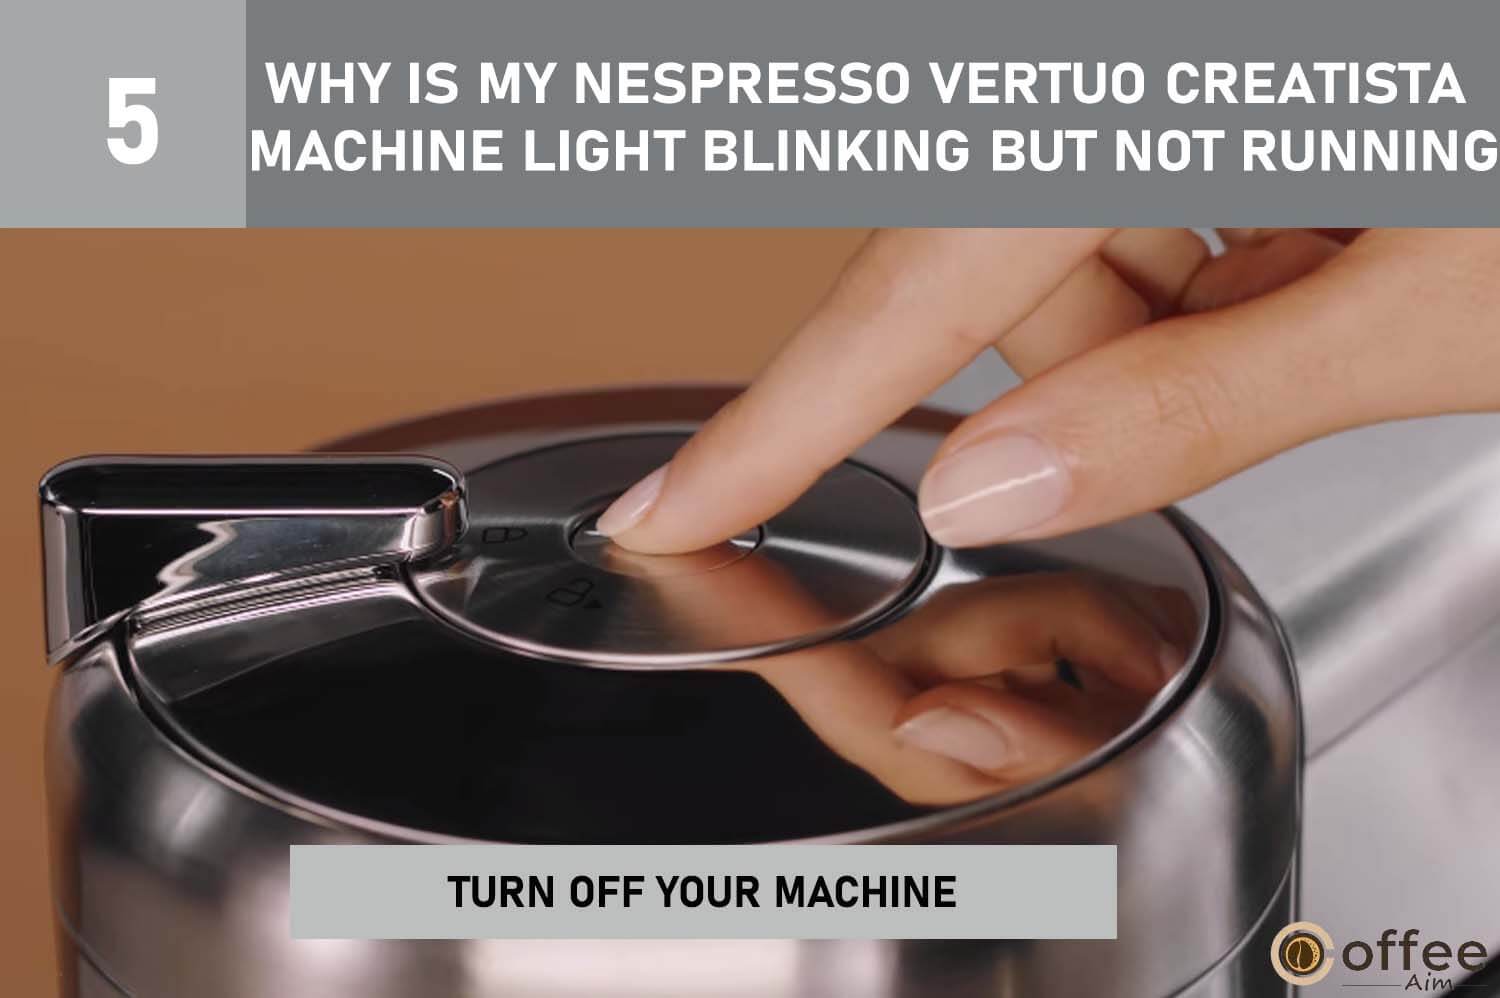 The image displays steps to turn off the Nespresso Vertuo Creatista machine with blinking lights but not working.